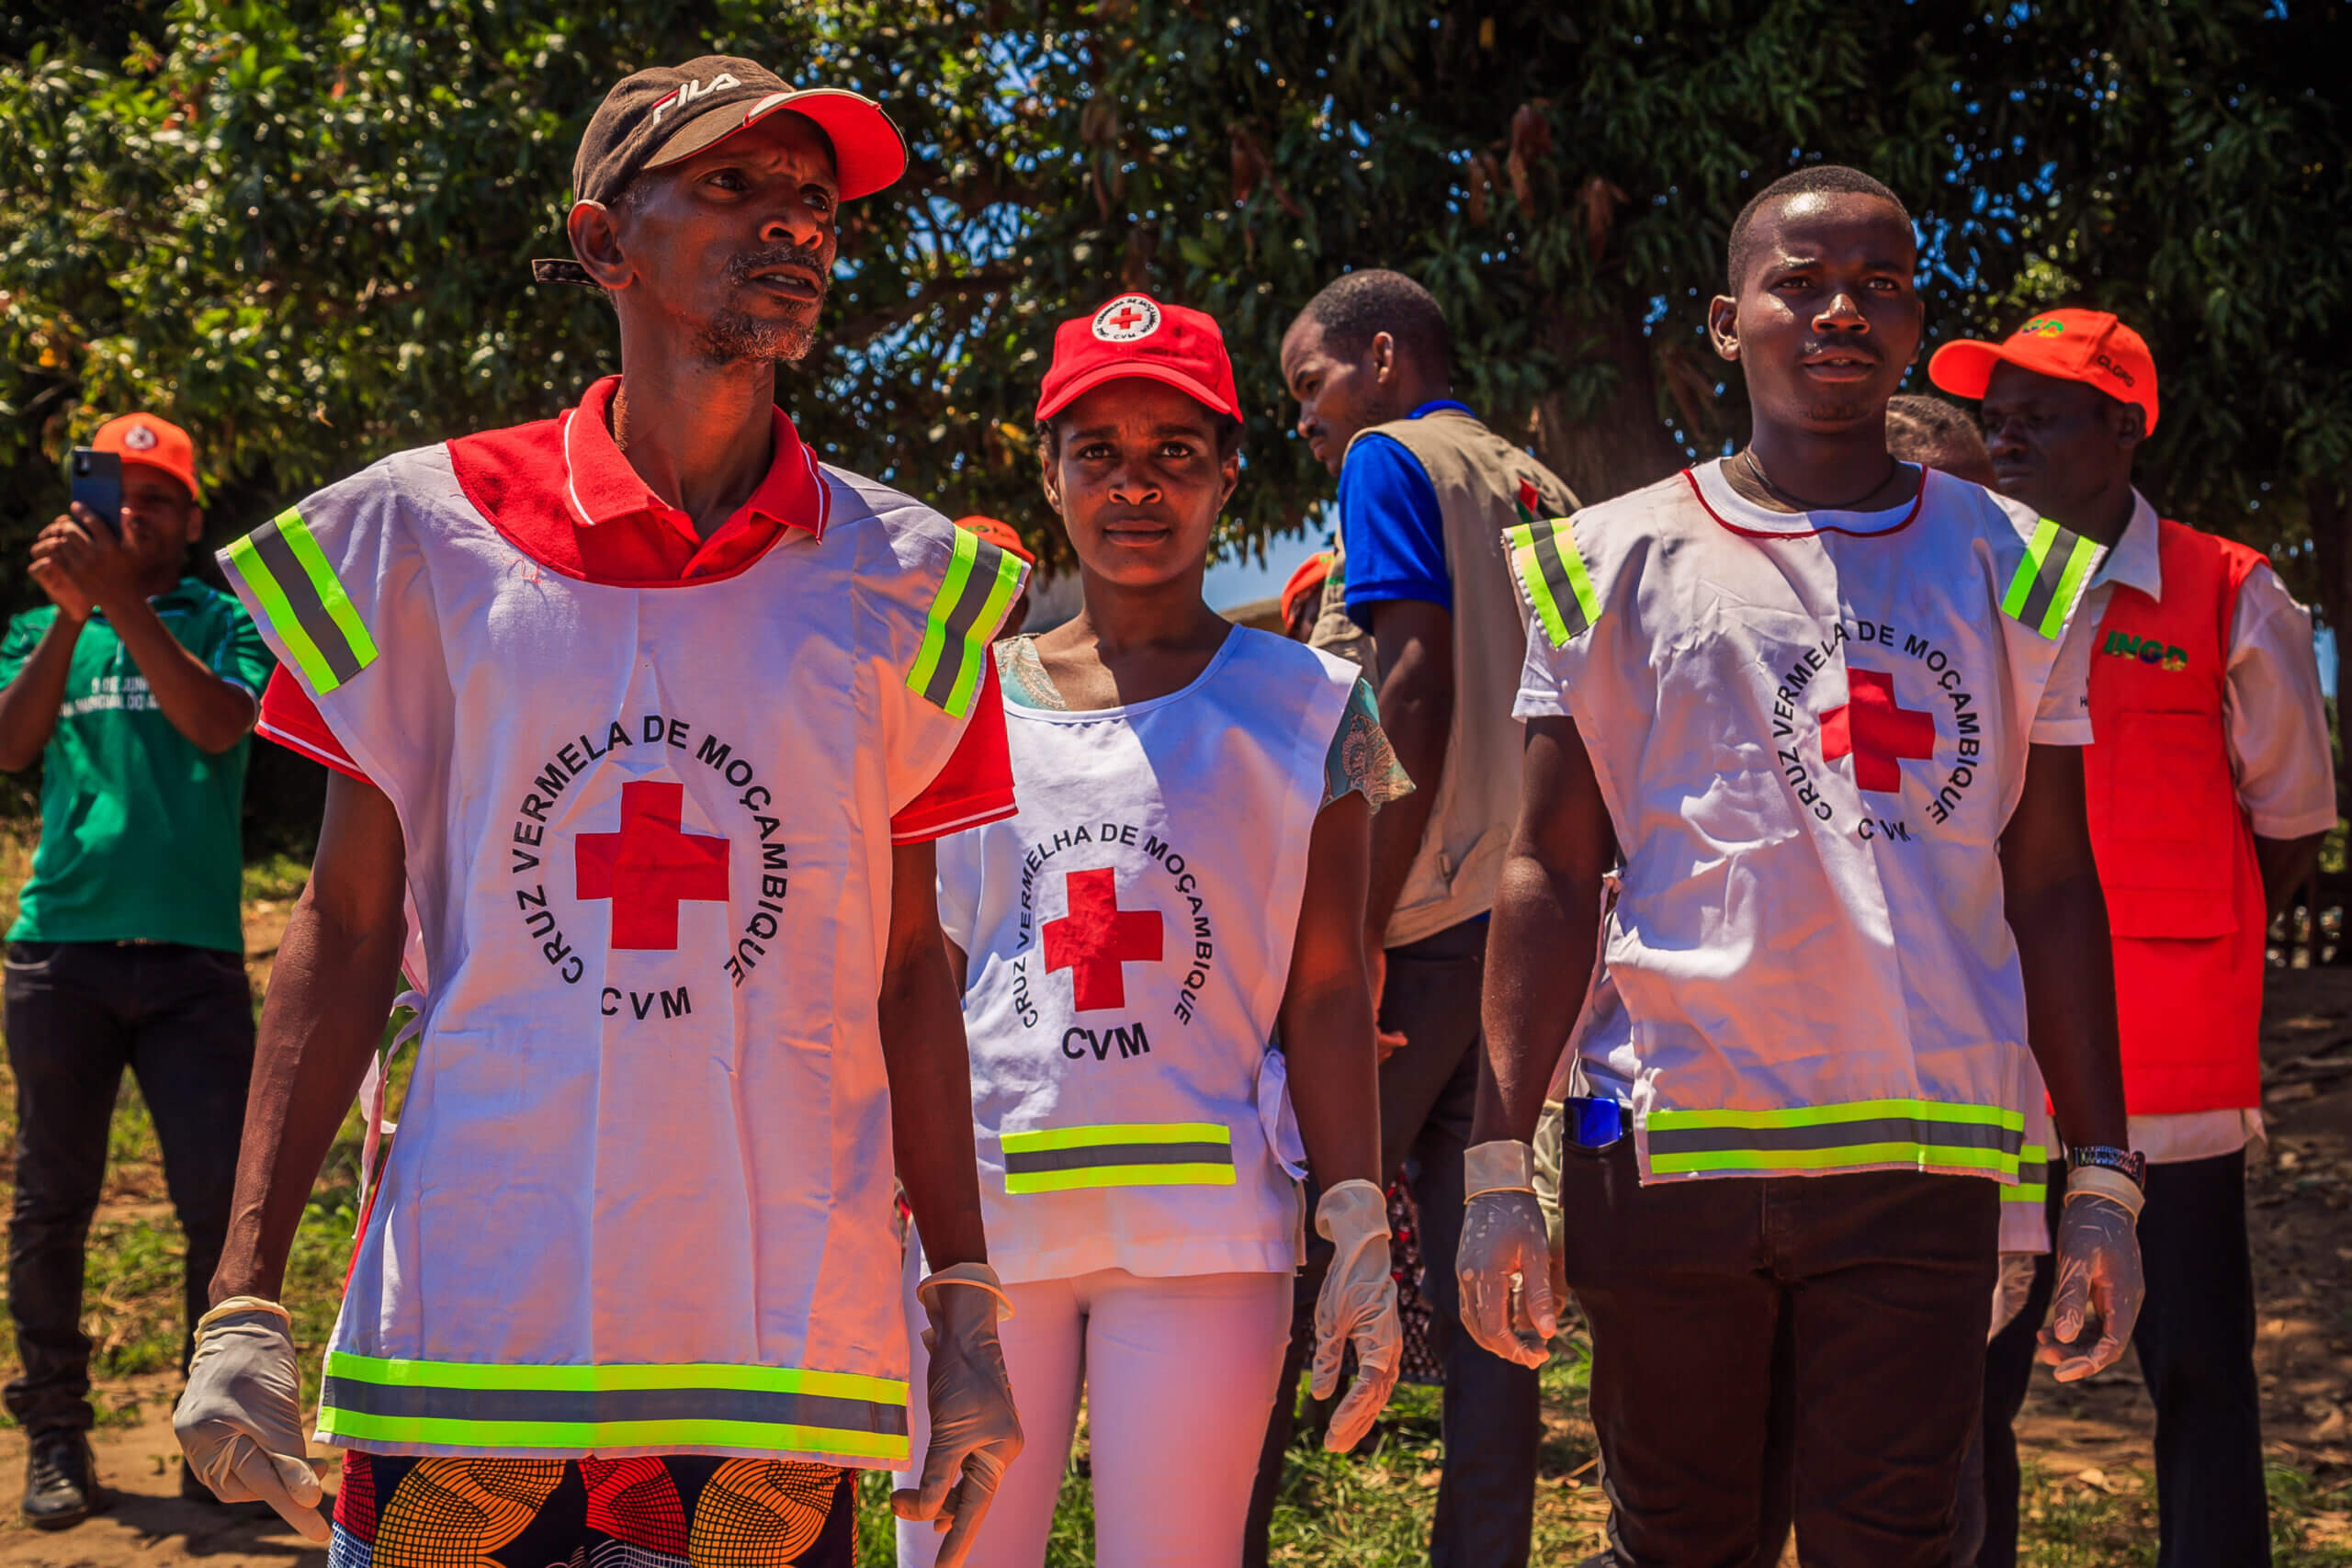 A woman stands in the middle of two men, wearing a red cap. All three people are wearing white vests, with reflective stripes and crosses the middle. The vests read "CVM. Cruz Vermela De Mocambique". 